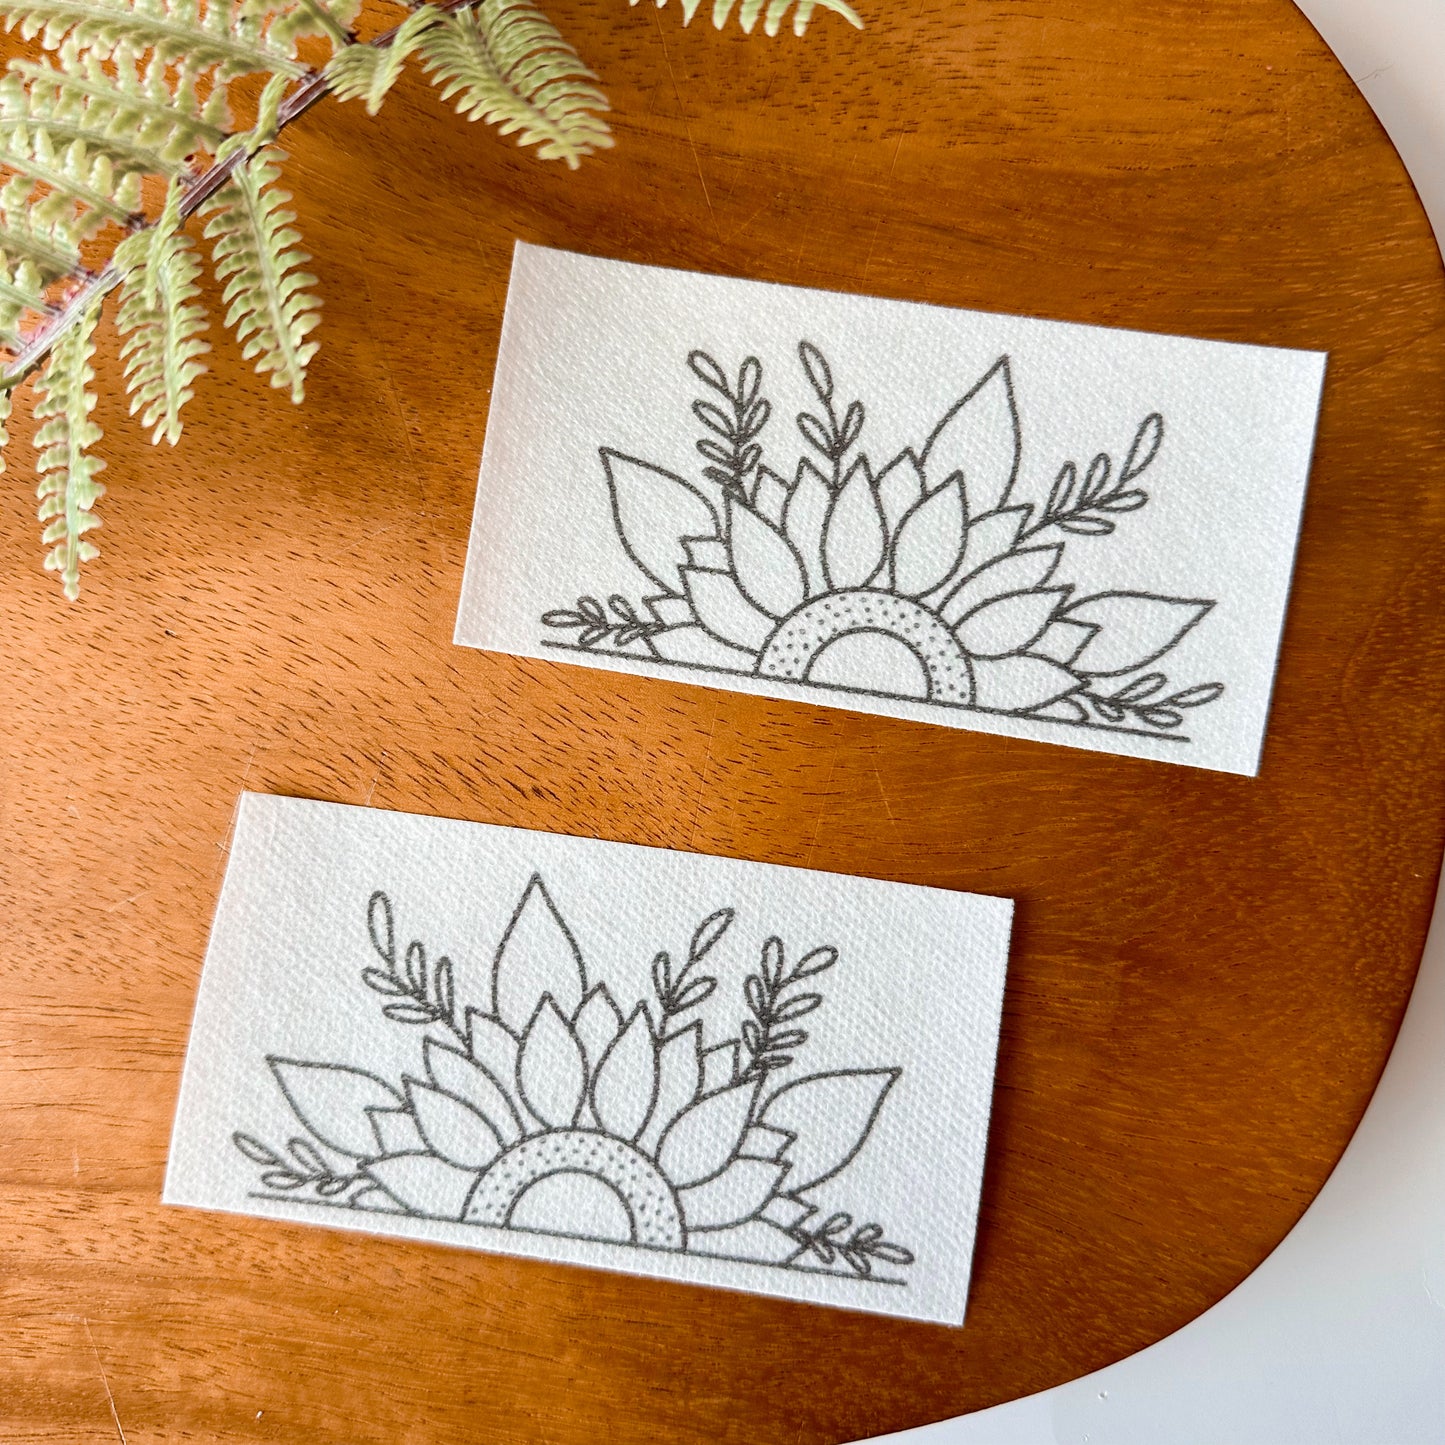 Sunflowers Forever Stick & Stitch Embroidery Patterns